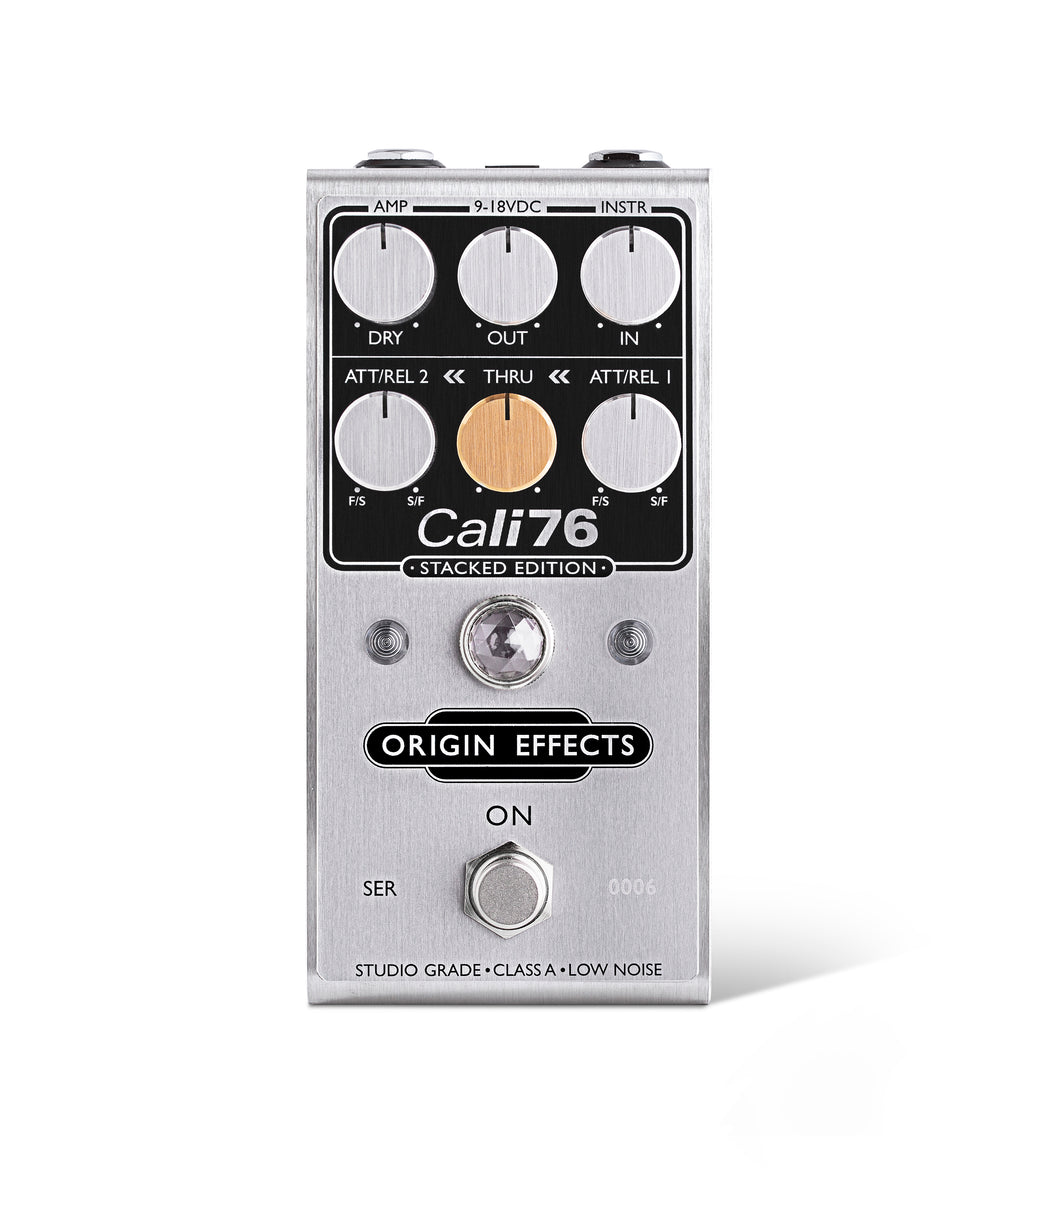 Origin Effects Cali76 Stacked Edition - Dual Stage Compressor